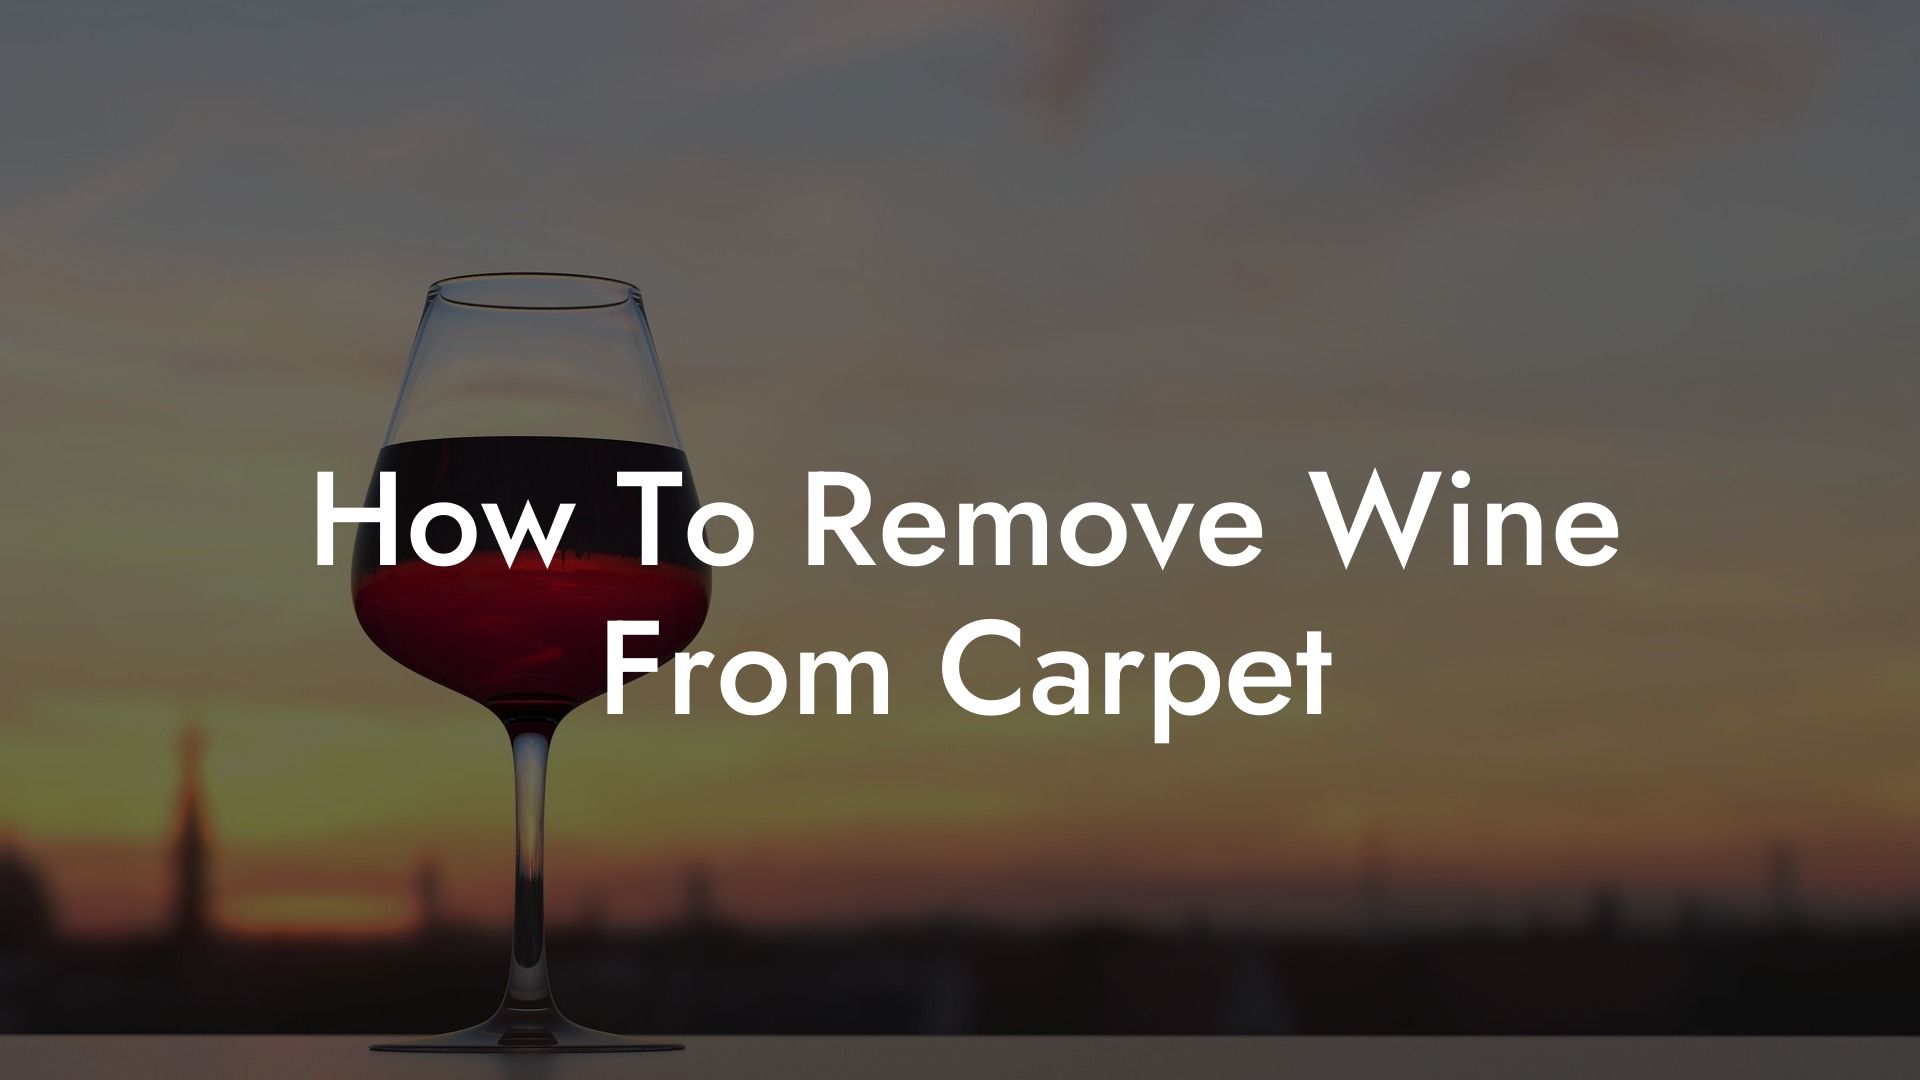 How To Remove Wine From Carpet